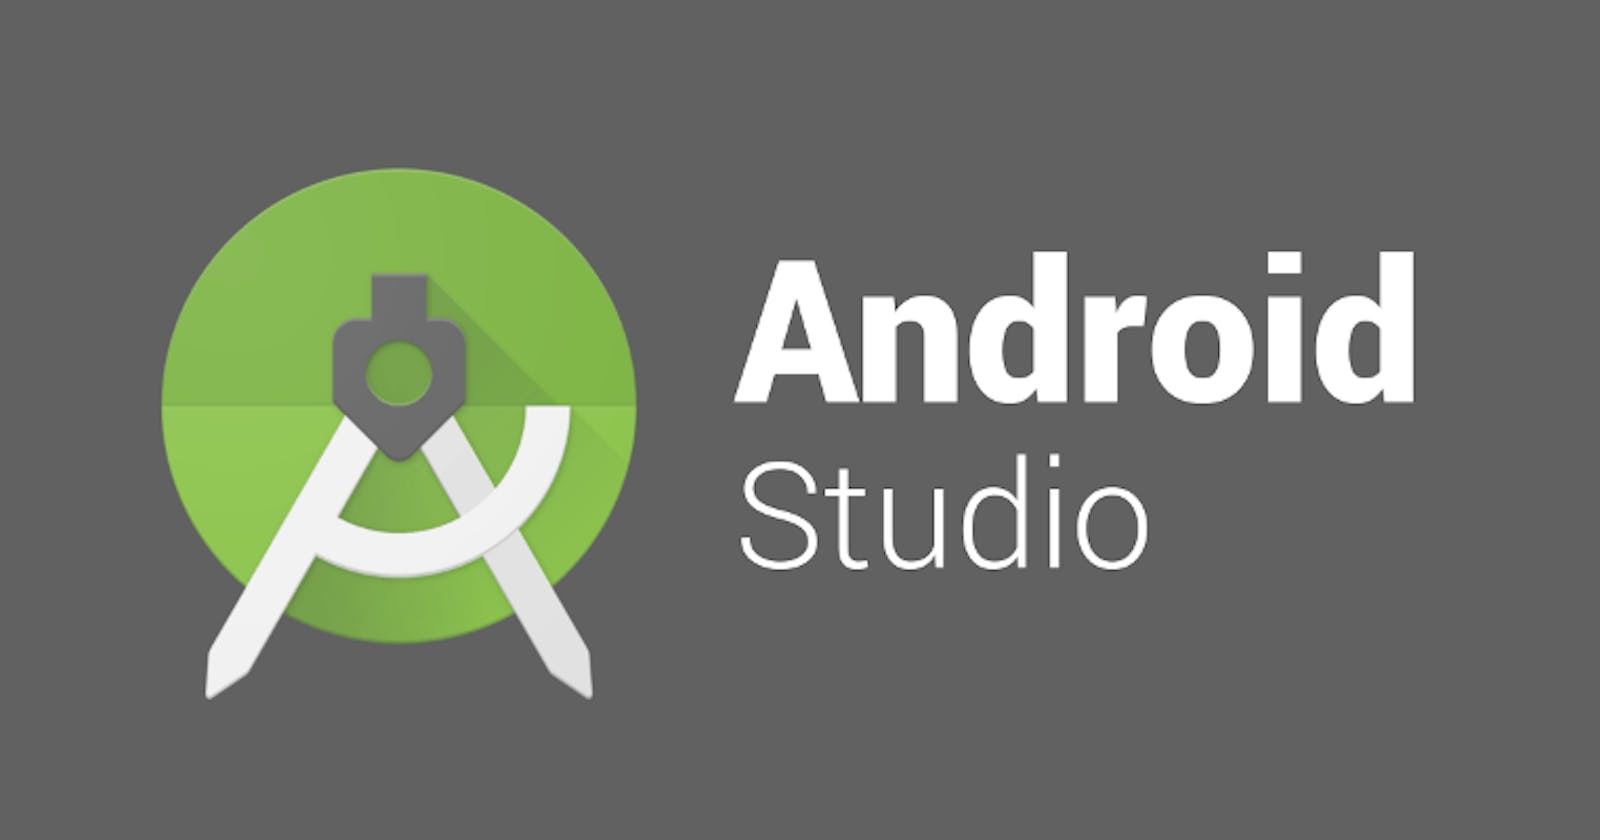 Hello World! With Android Studio